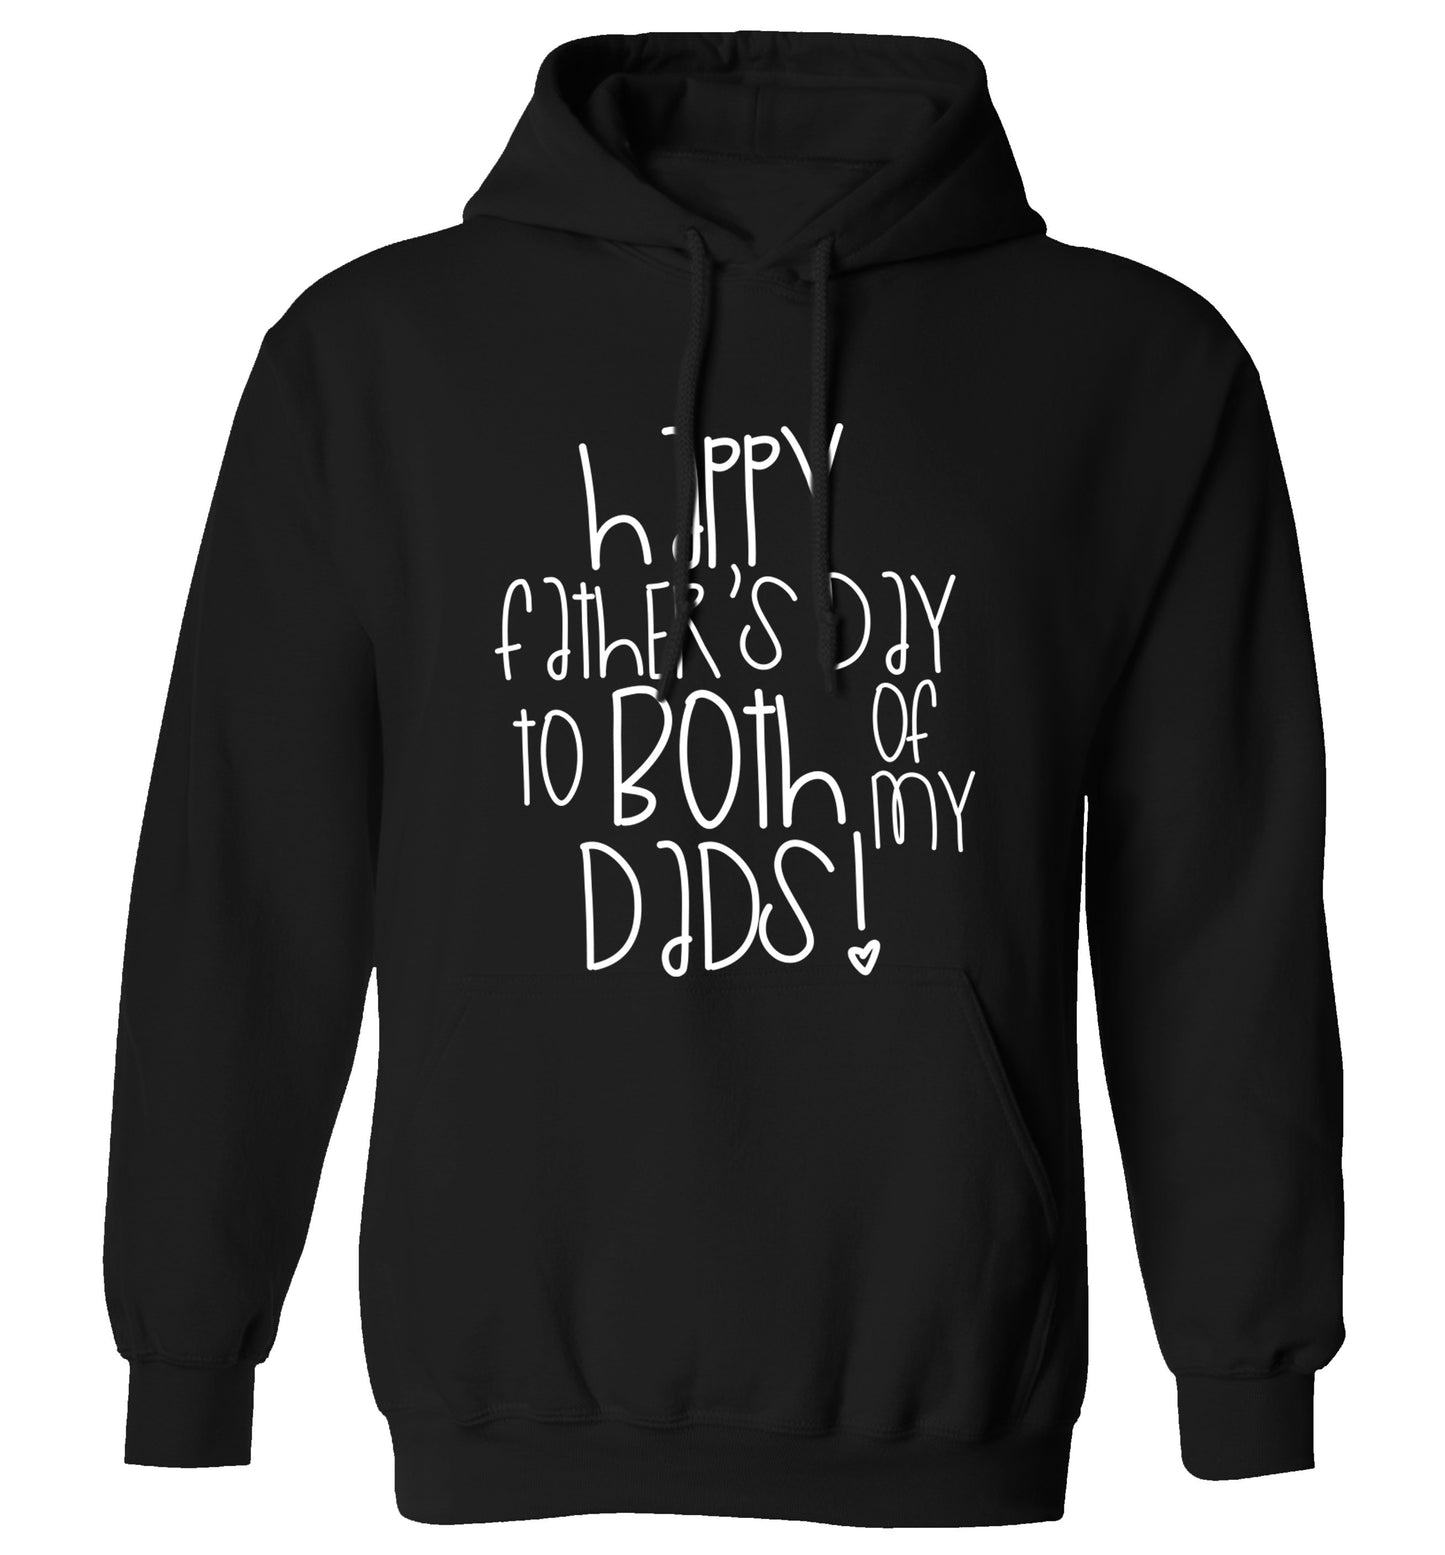 Happy father's day to both of my dads adults unisex black hoodie 2XL